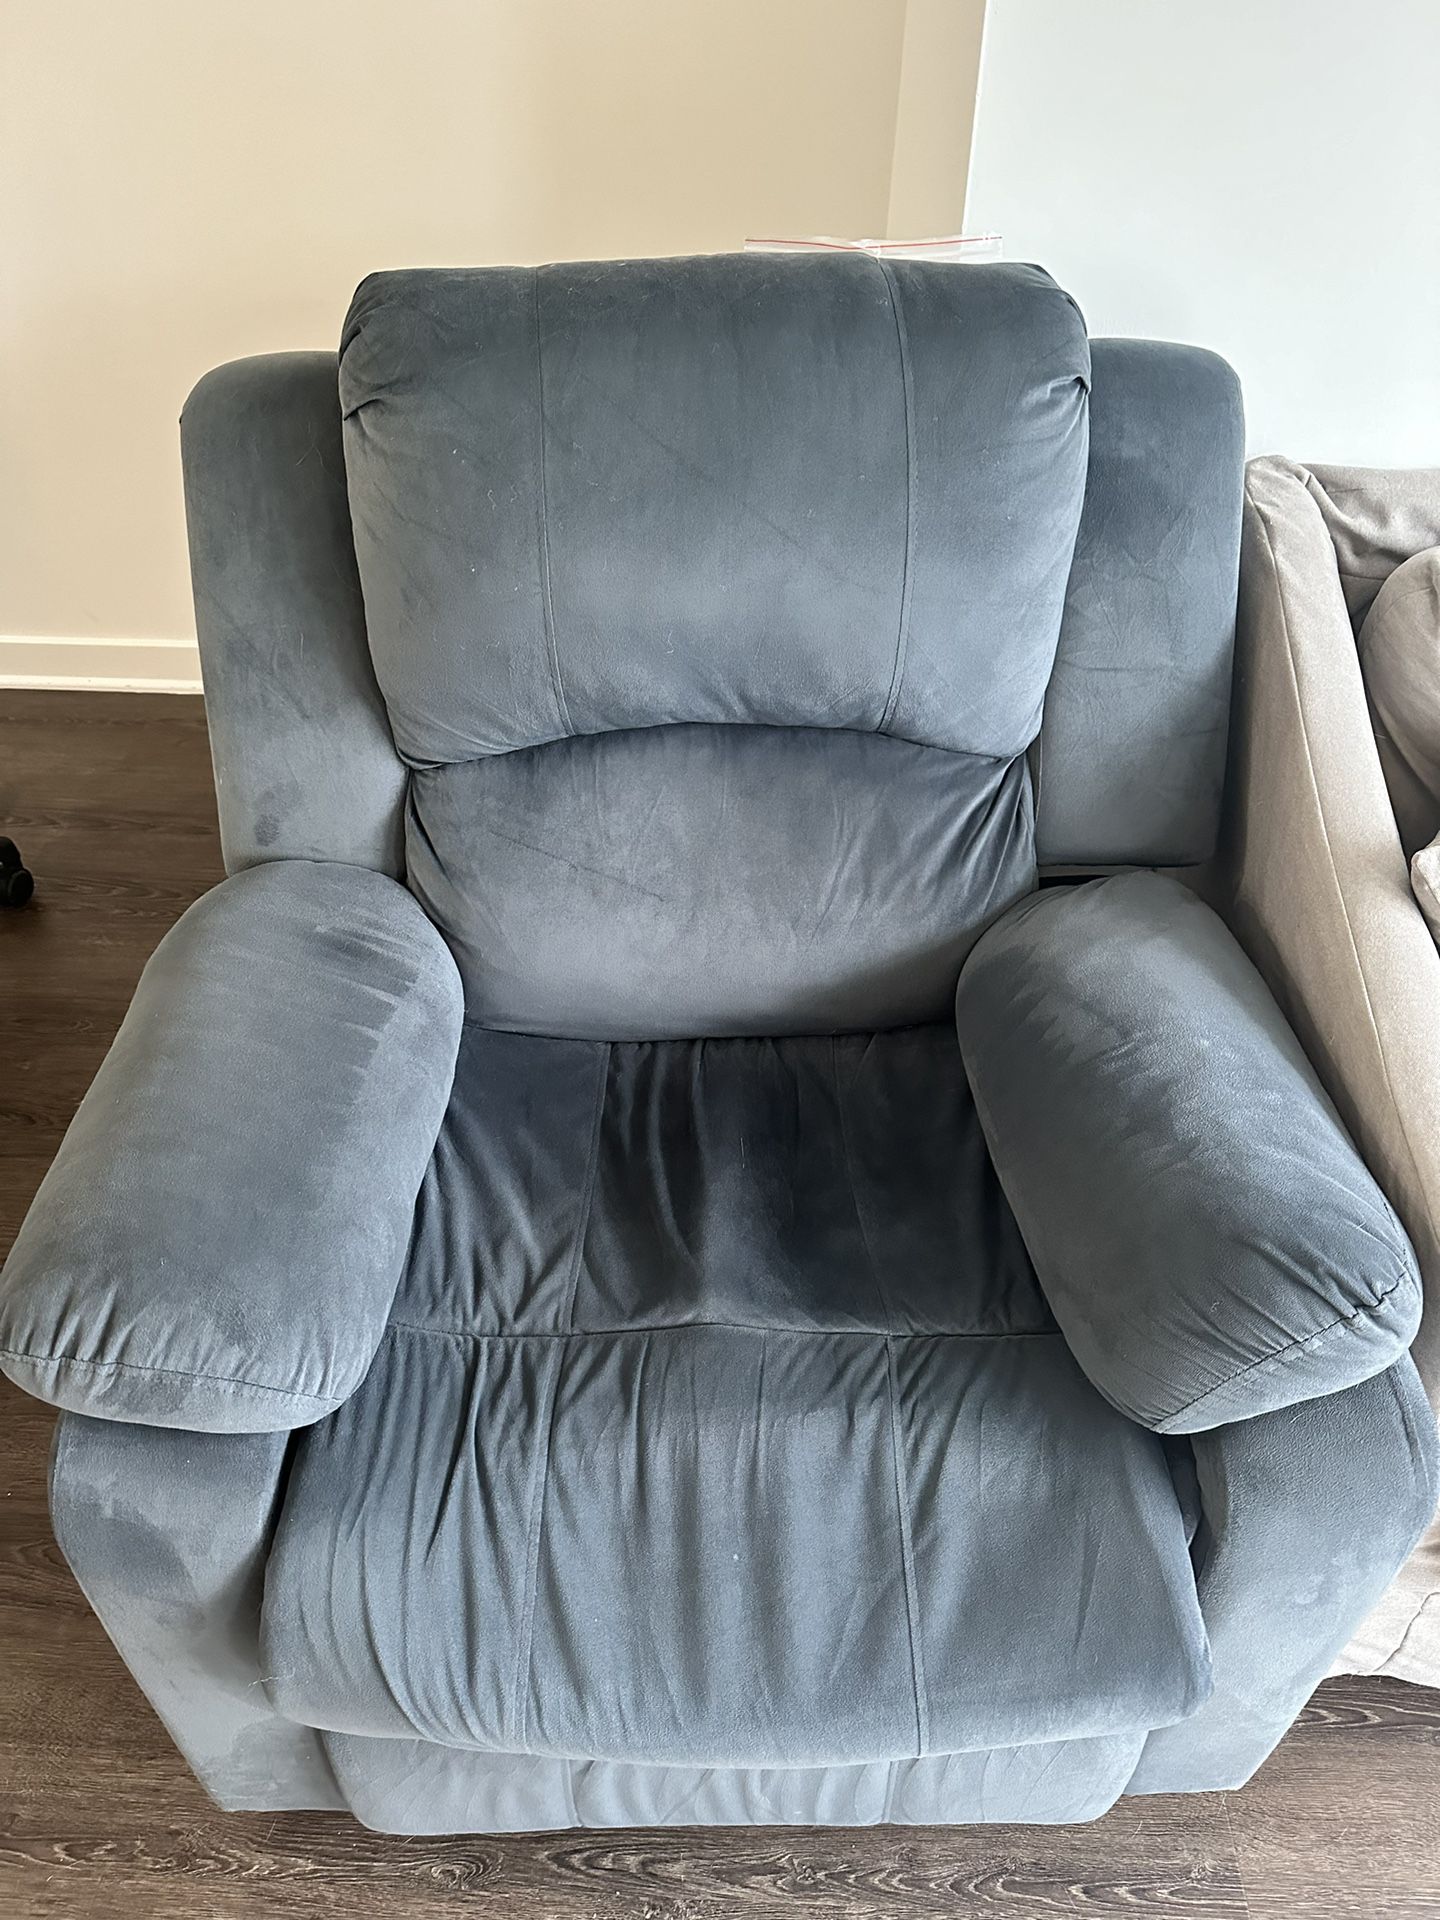 Recliner COUCH FOR FREE ONLY PICKUP 